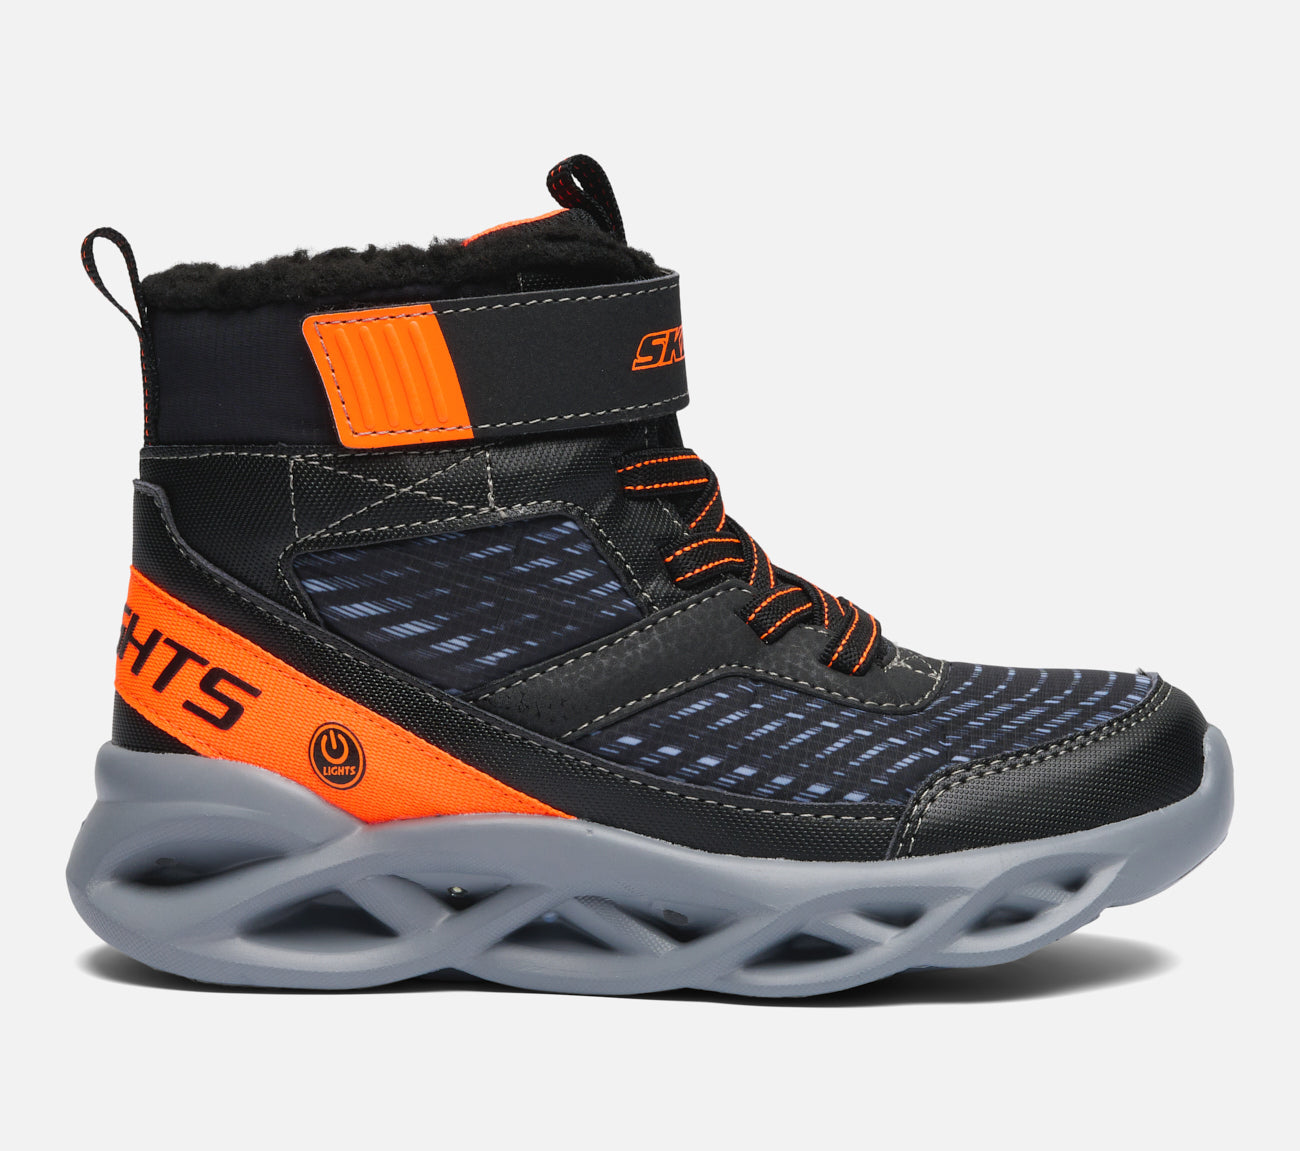 Twisted Brights Boot Skechers